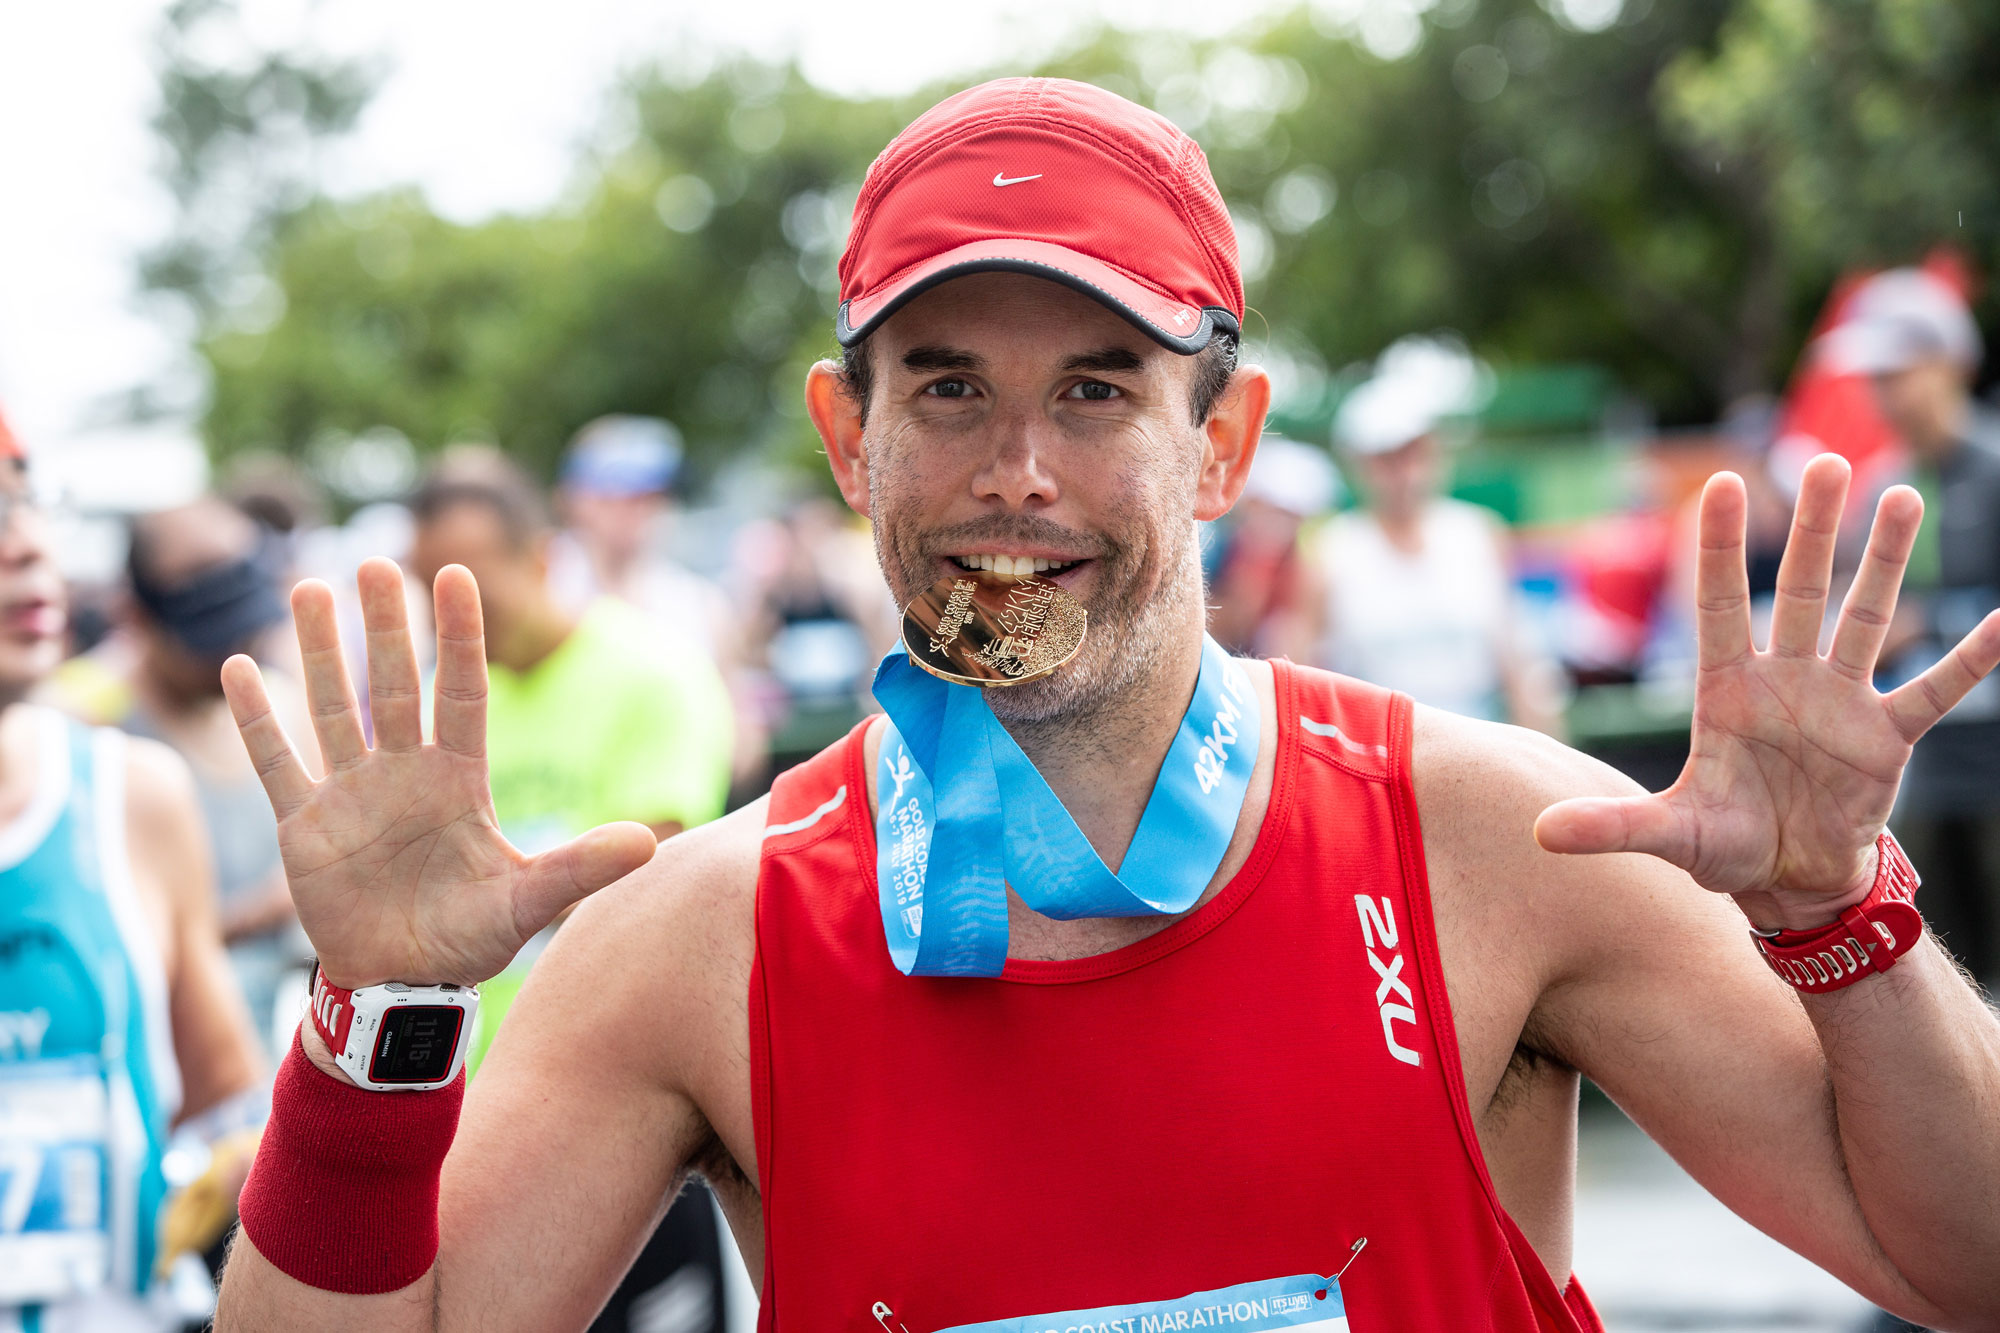 GCM19-Finisher-with-medal-in-mouth-optimised